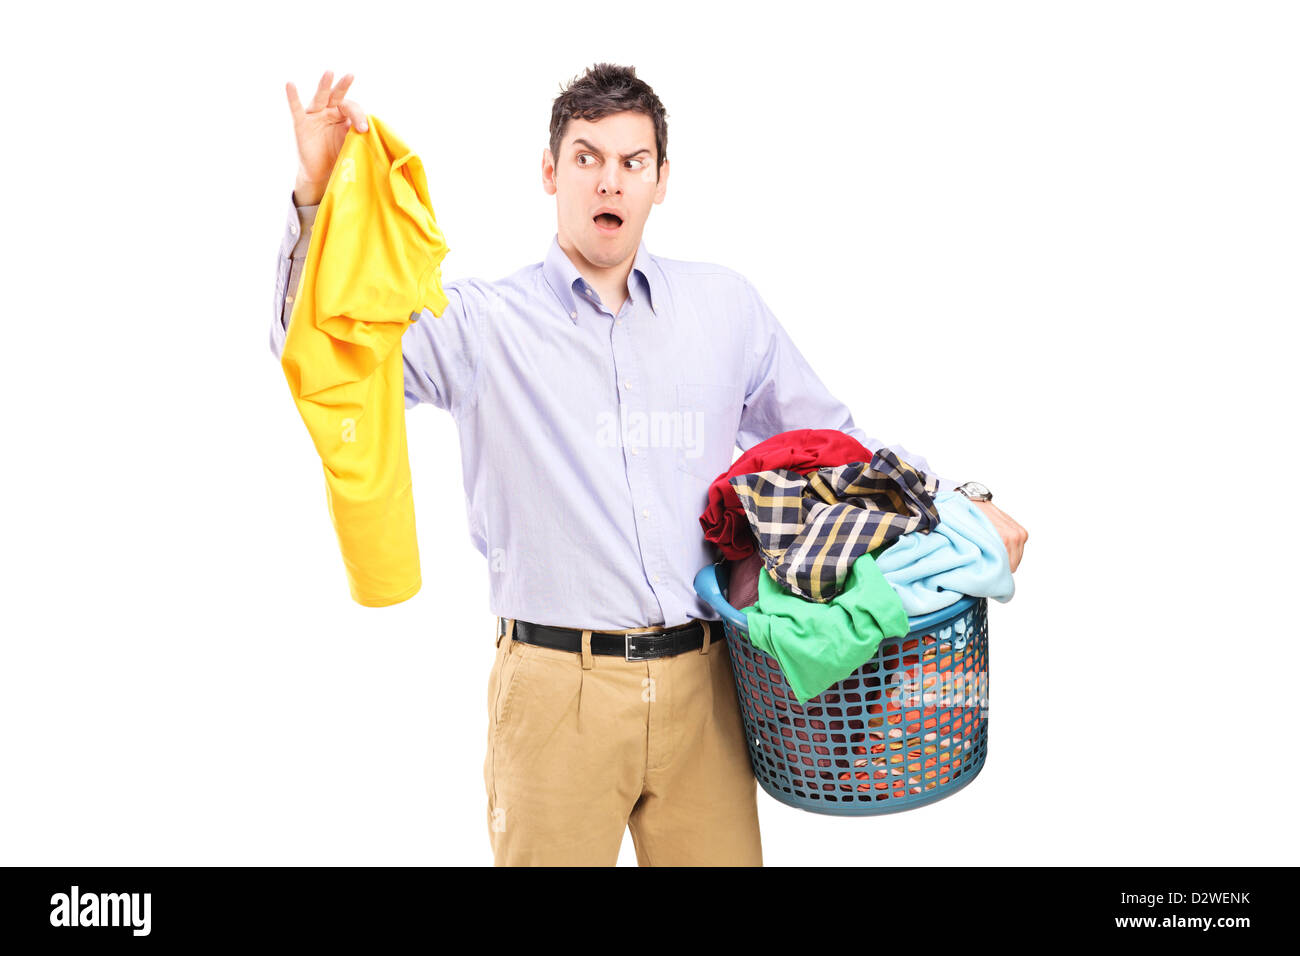 Man holding a smelly blouse and a laundry basket isolated on white background Stock Photo